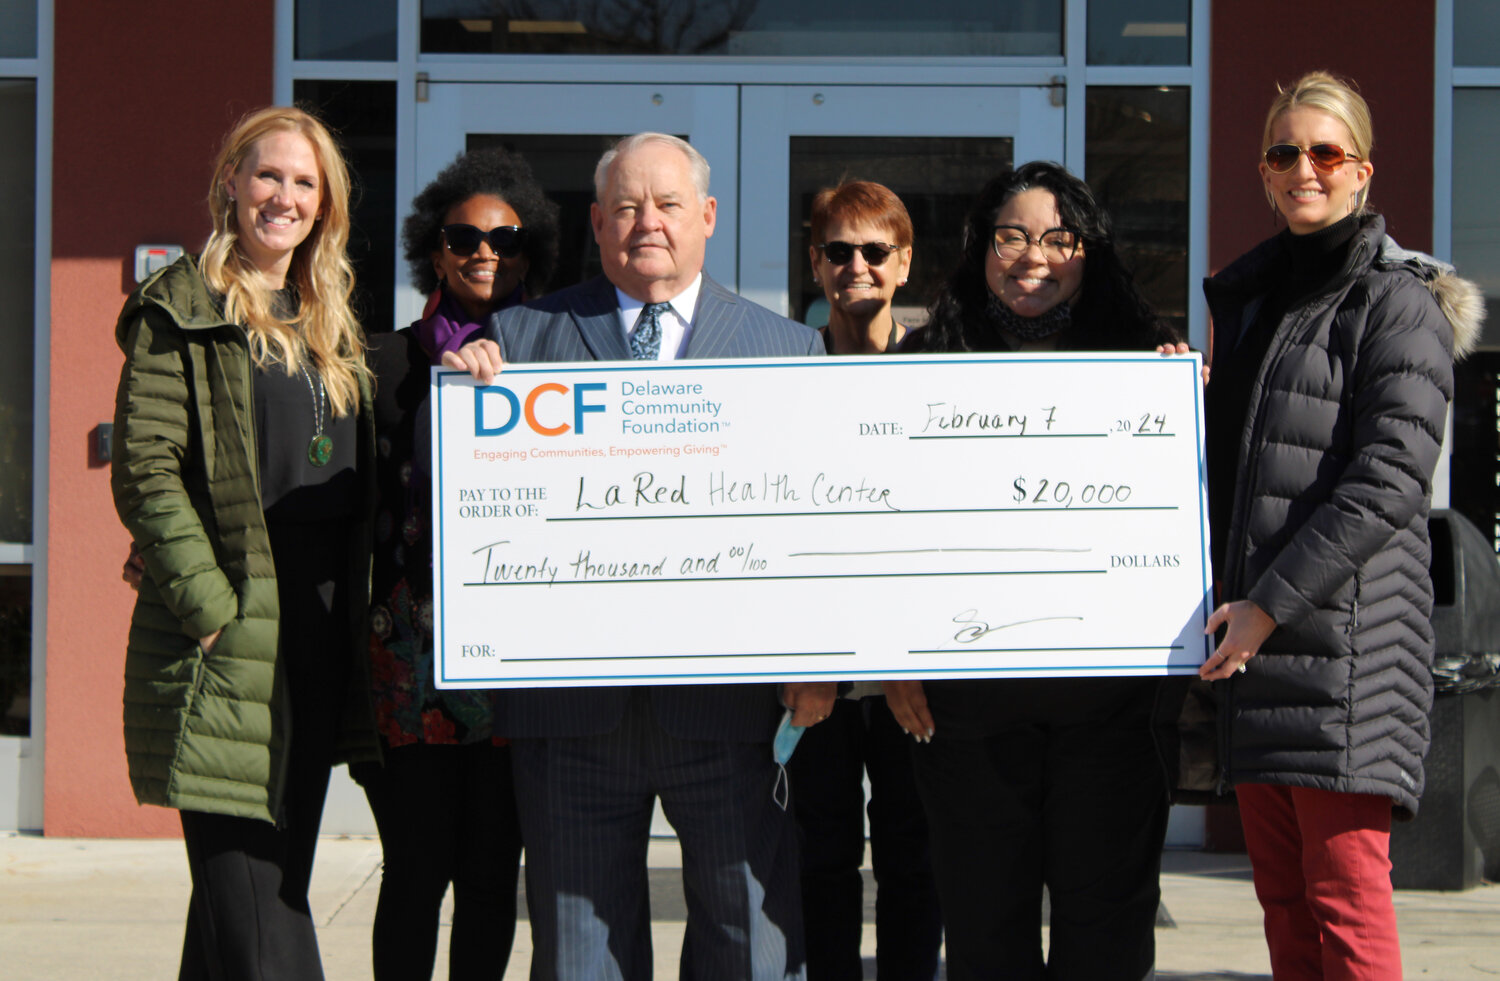 From left, Rachel Hersh, La Red Health Center's deputy director; Viola Banks of La Red's administration; CEO Brian Olson; Nancy Bratmeyer and Joana Torres of the center's administration; and Jessica Gordon, southern Delaware philanthropy officer for the Delaware Community Foundation, take part in the check presentation.